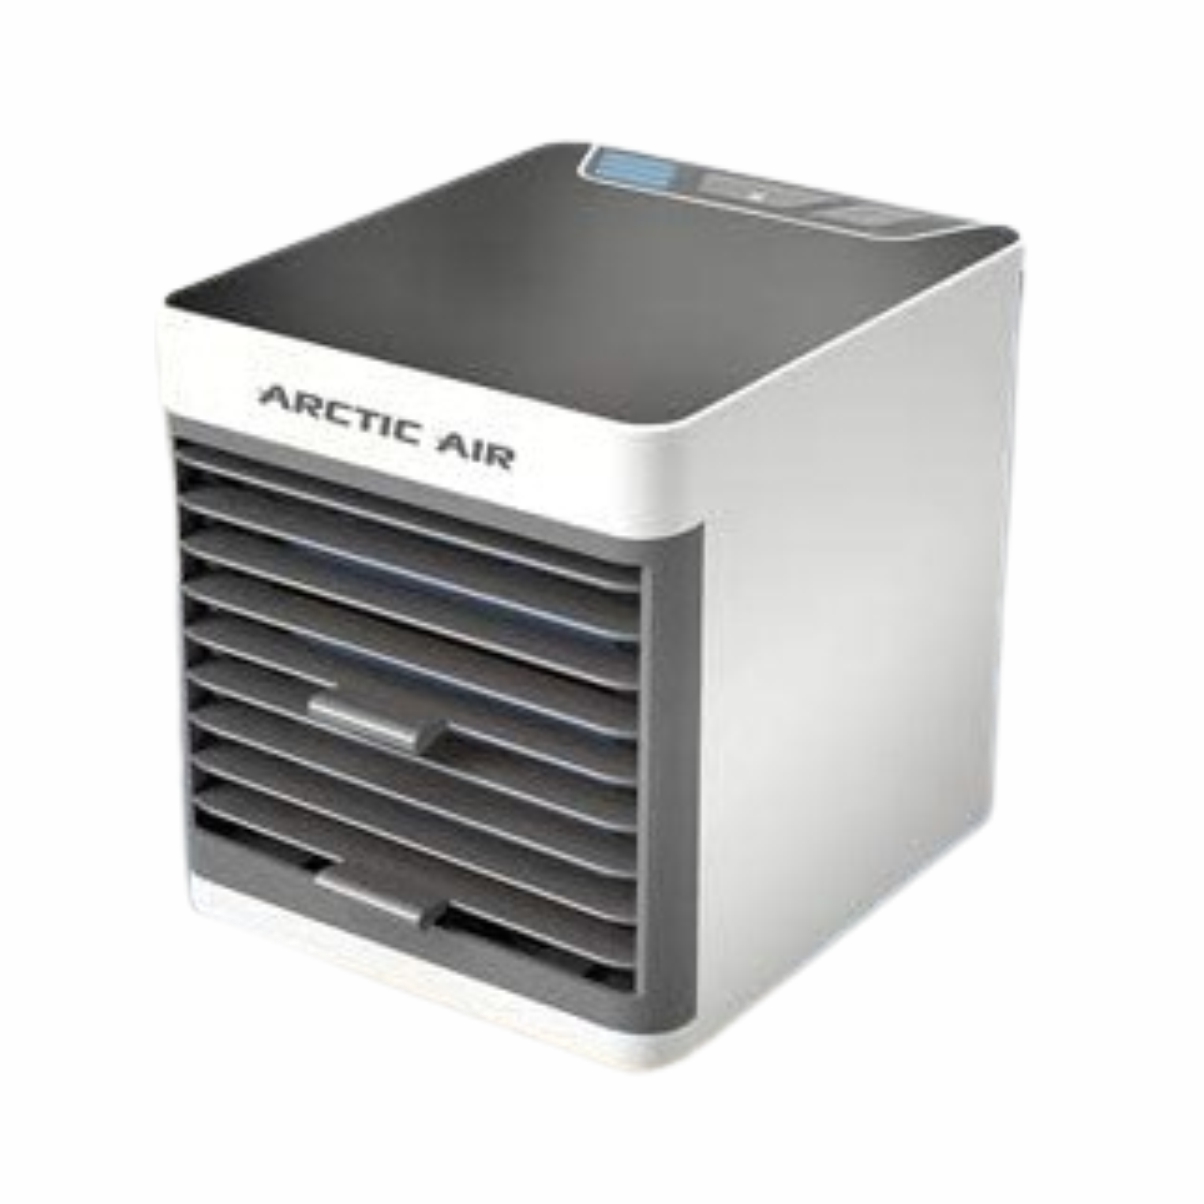 Arctic Ultra 2x White Personal USB Air Cooler - Cooling, Humidifying and Purifying - Energy Efficient & Compact Design - LED Mood Light - 45 Sq. Ft. Coverage